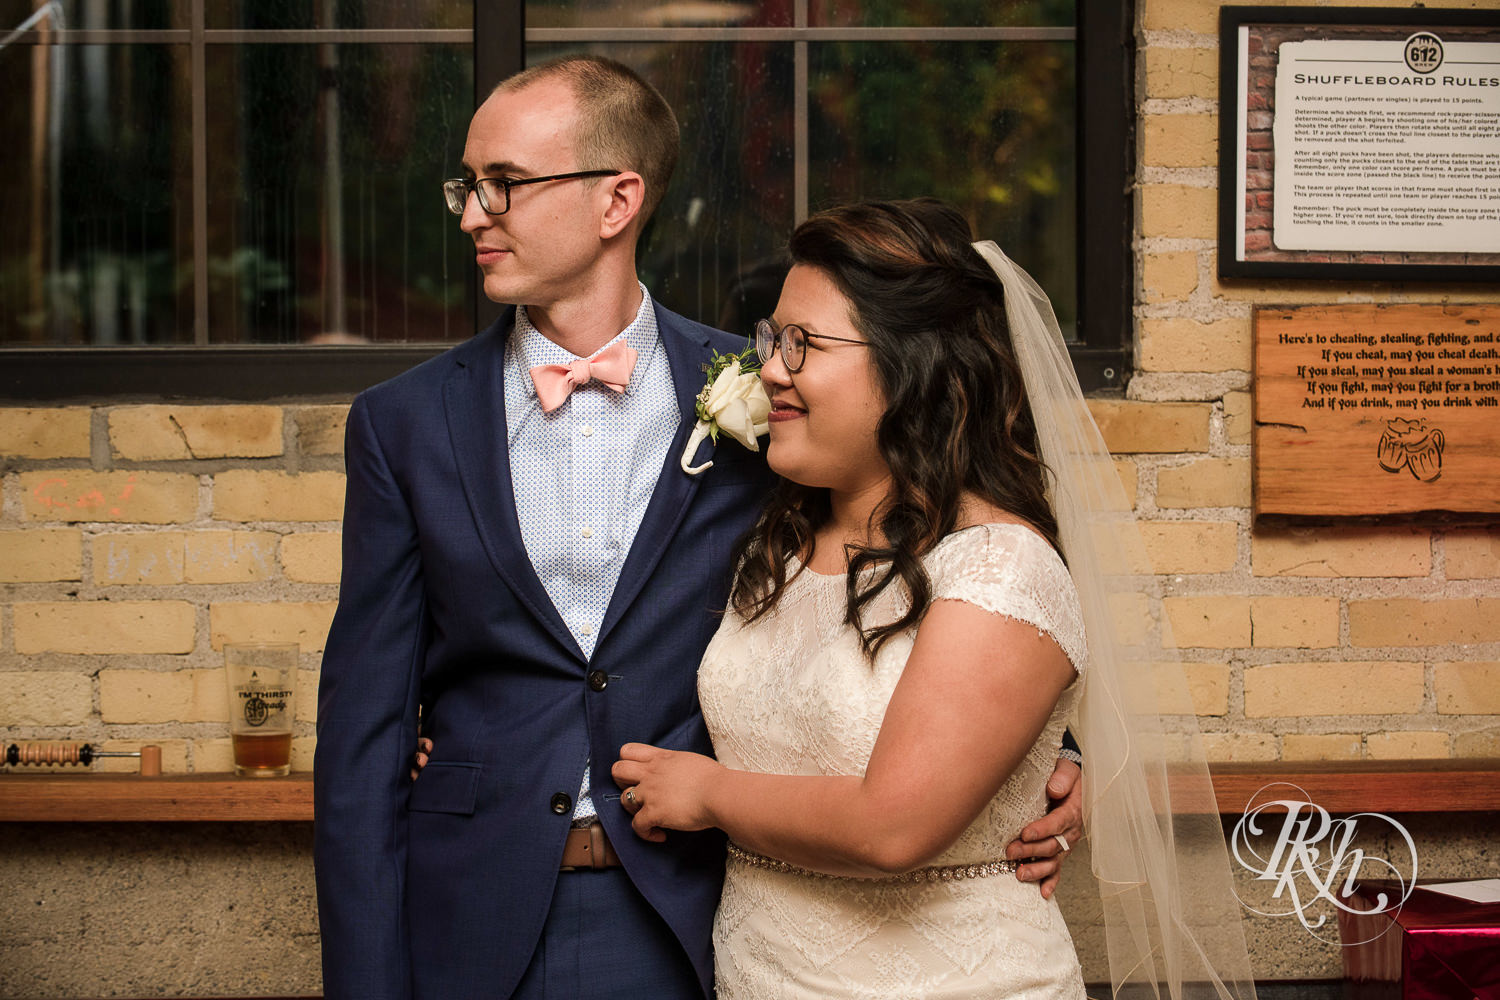 Asian bride with glasses and groom smile during wedding speeches at 612 Brew in Minneapolis, Minnesota.